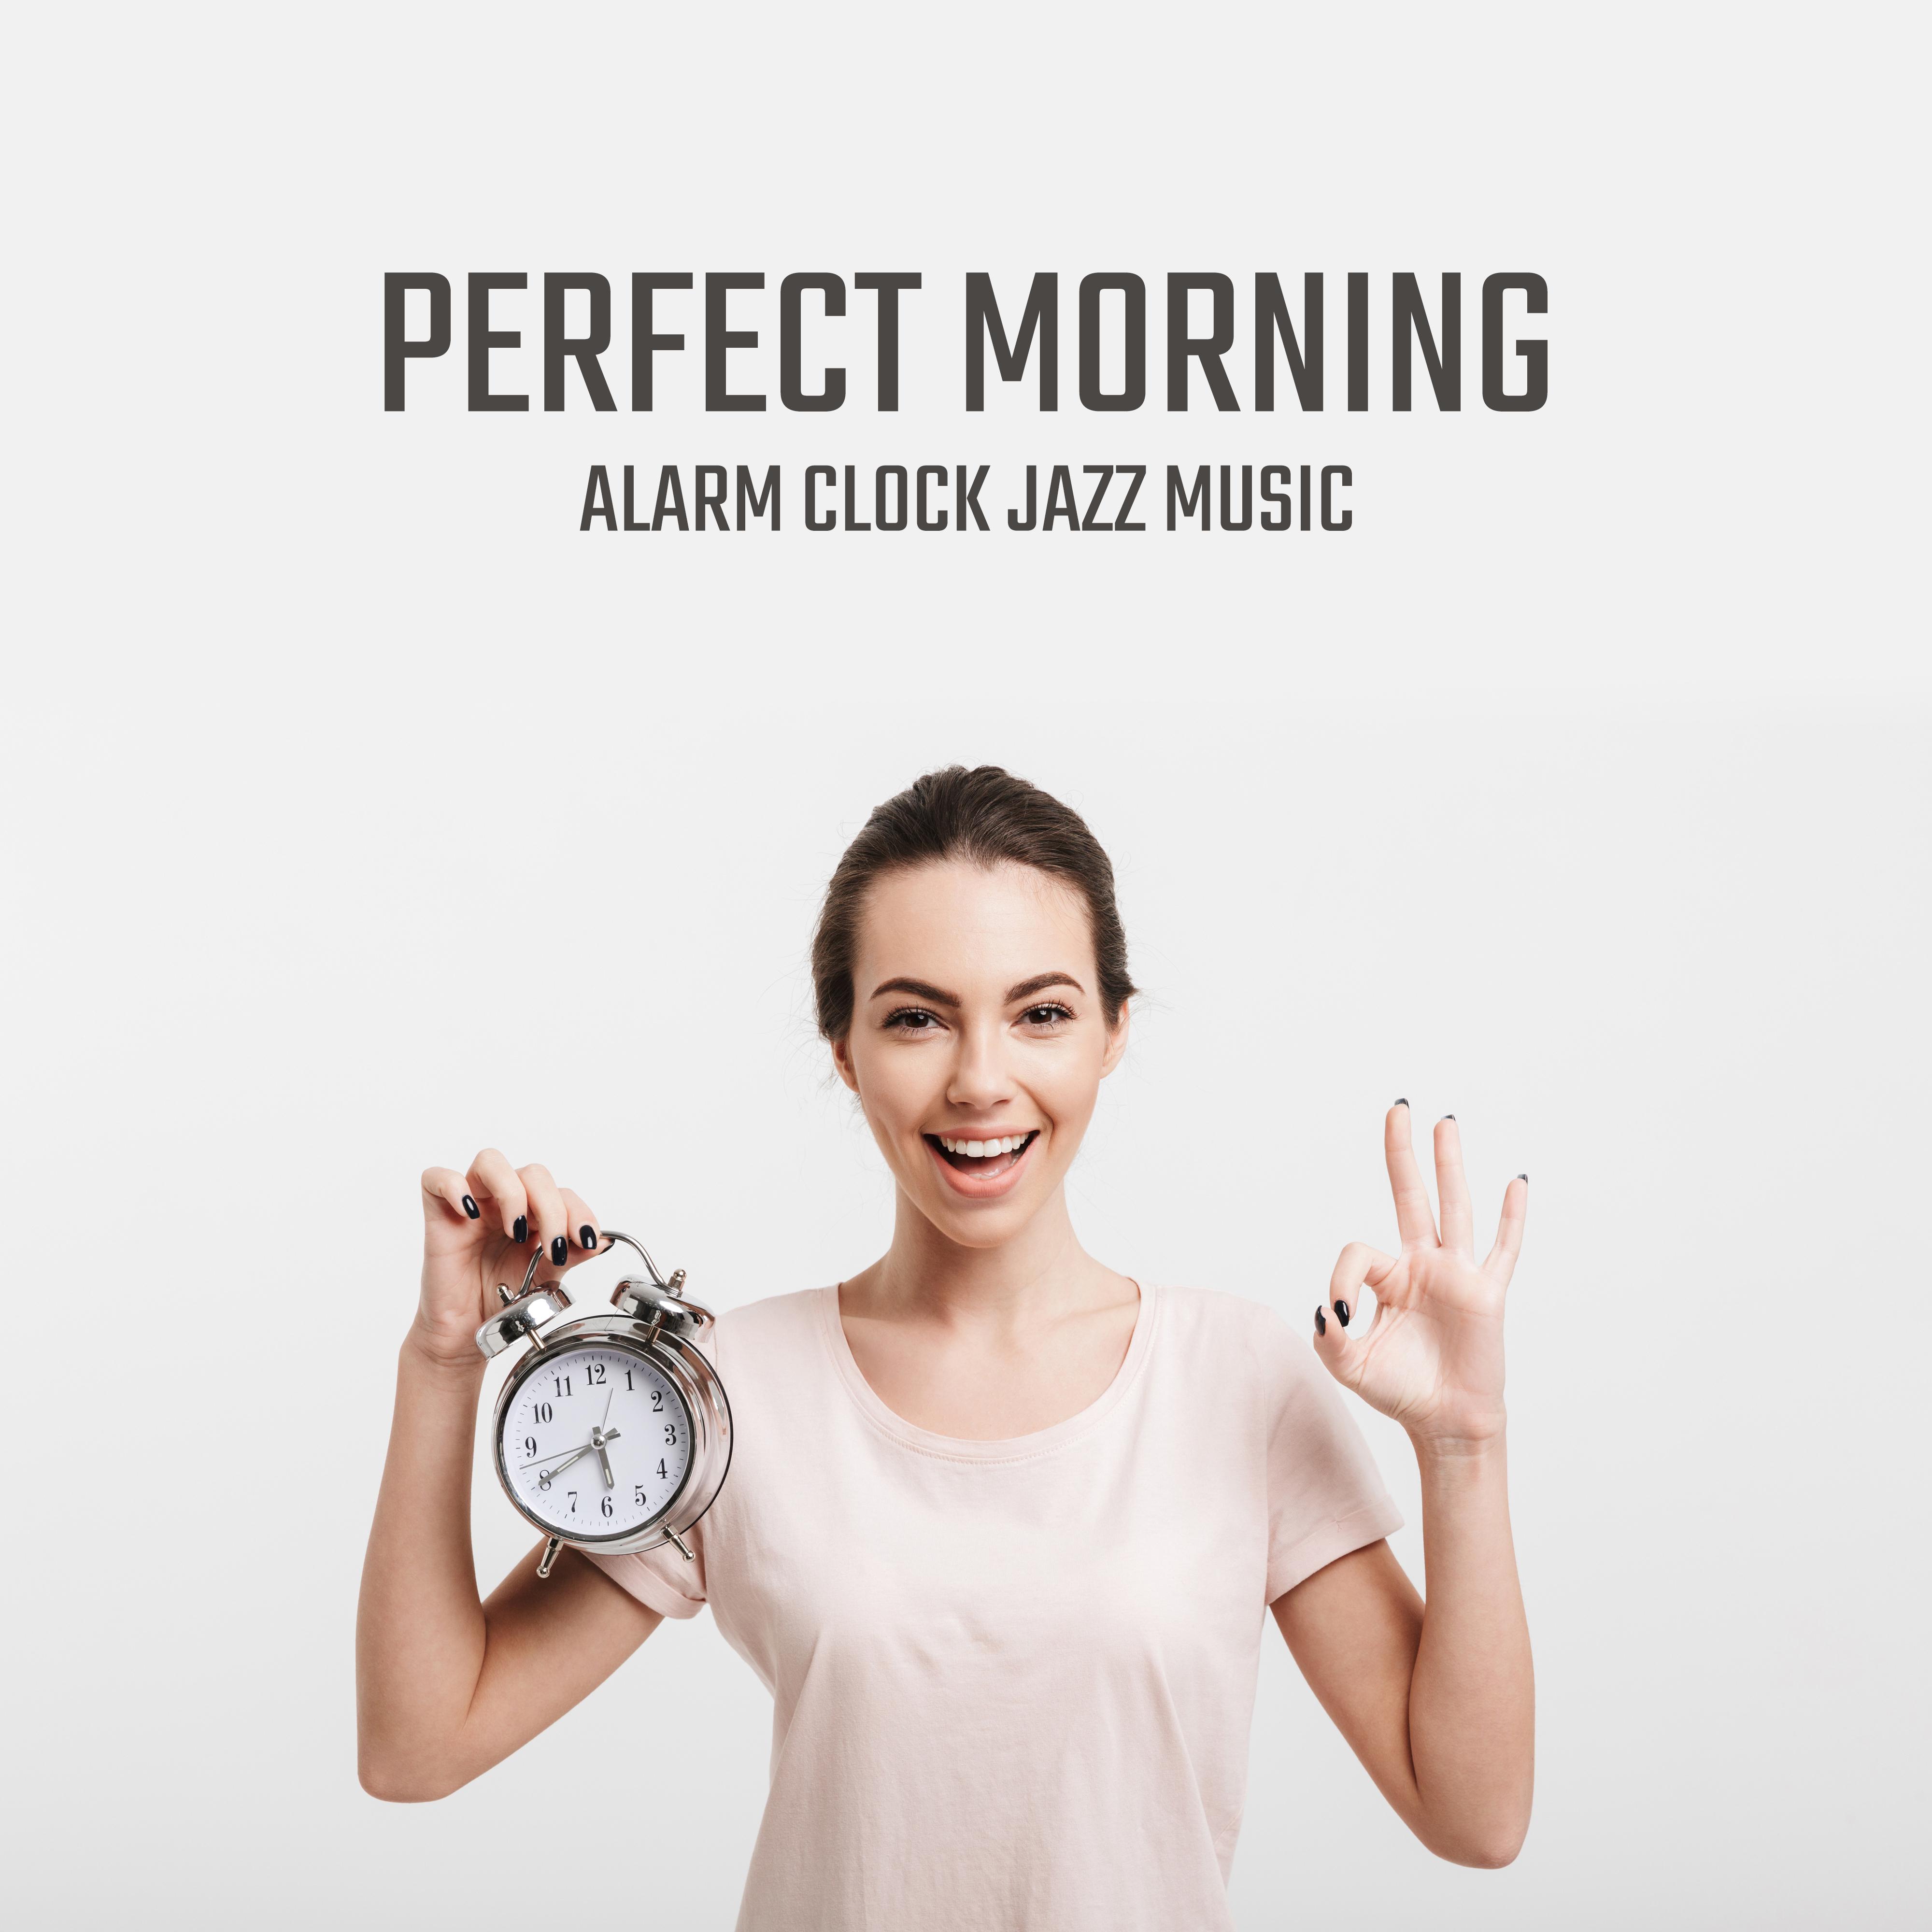 Perfect Morning Alarm Clock Jazz Music: 2019 Smooth Jazz Songs Selection for Morning Positive Energy, Breakfast Background Melodies, Happy Feelings